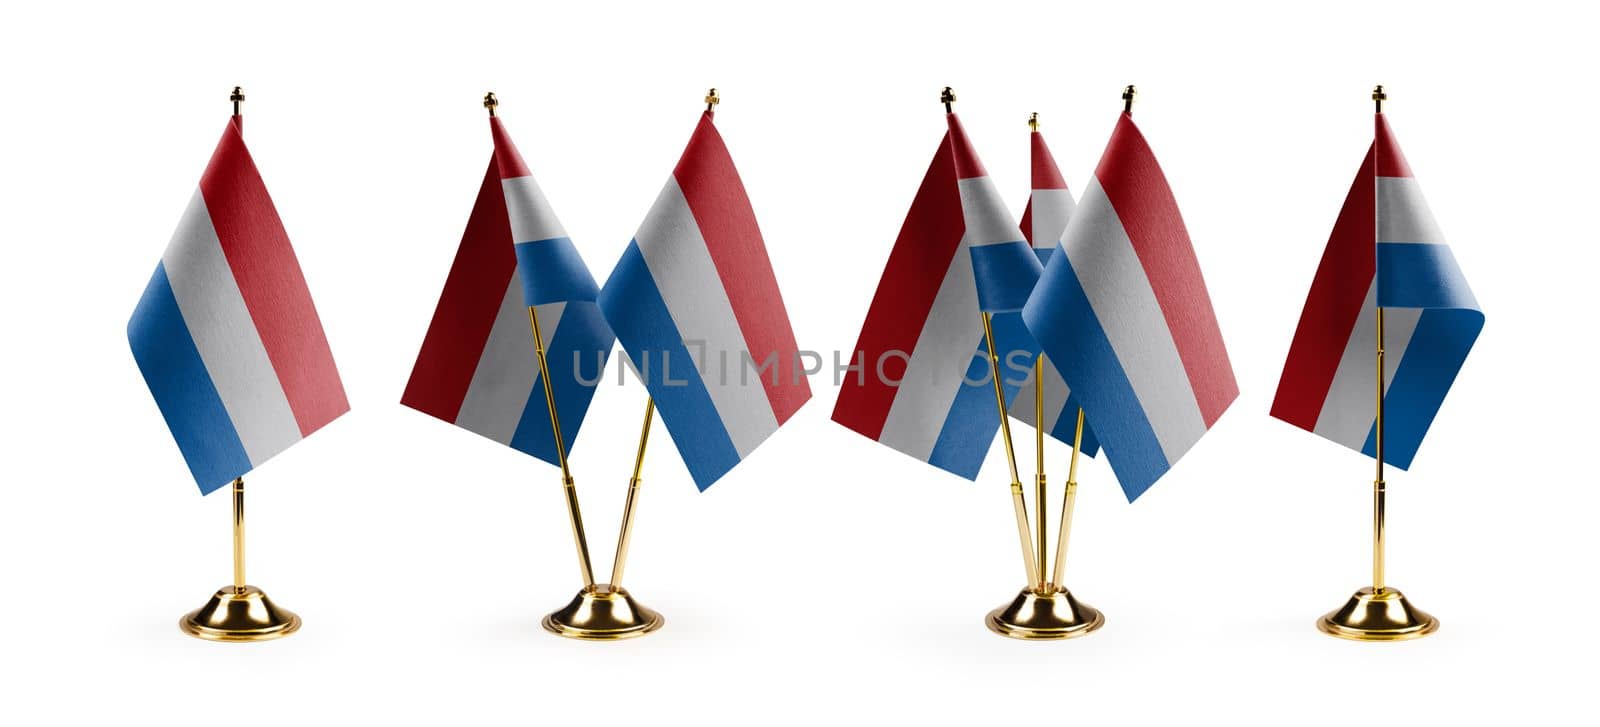 Small national flags of the Netherlands on a white background.